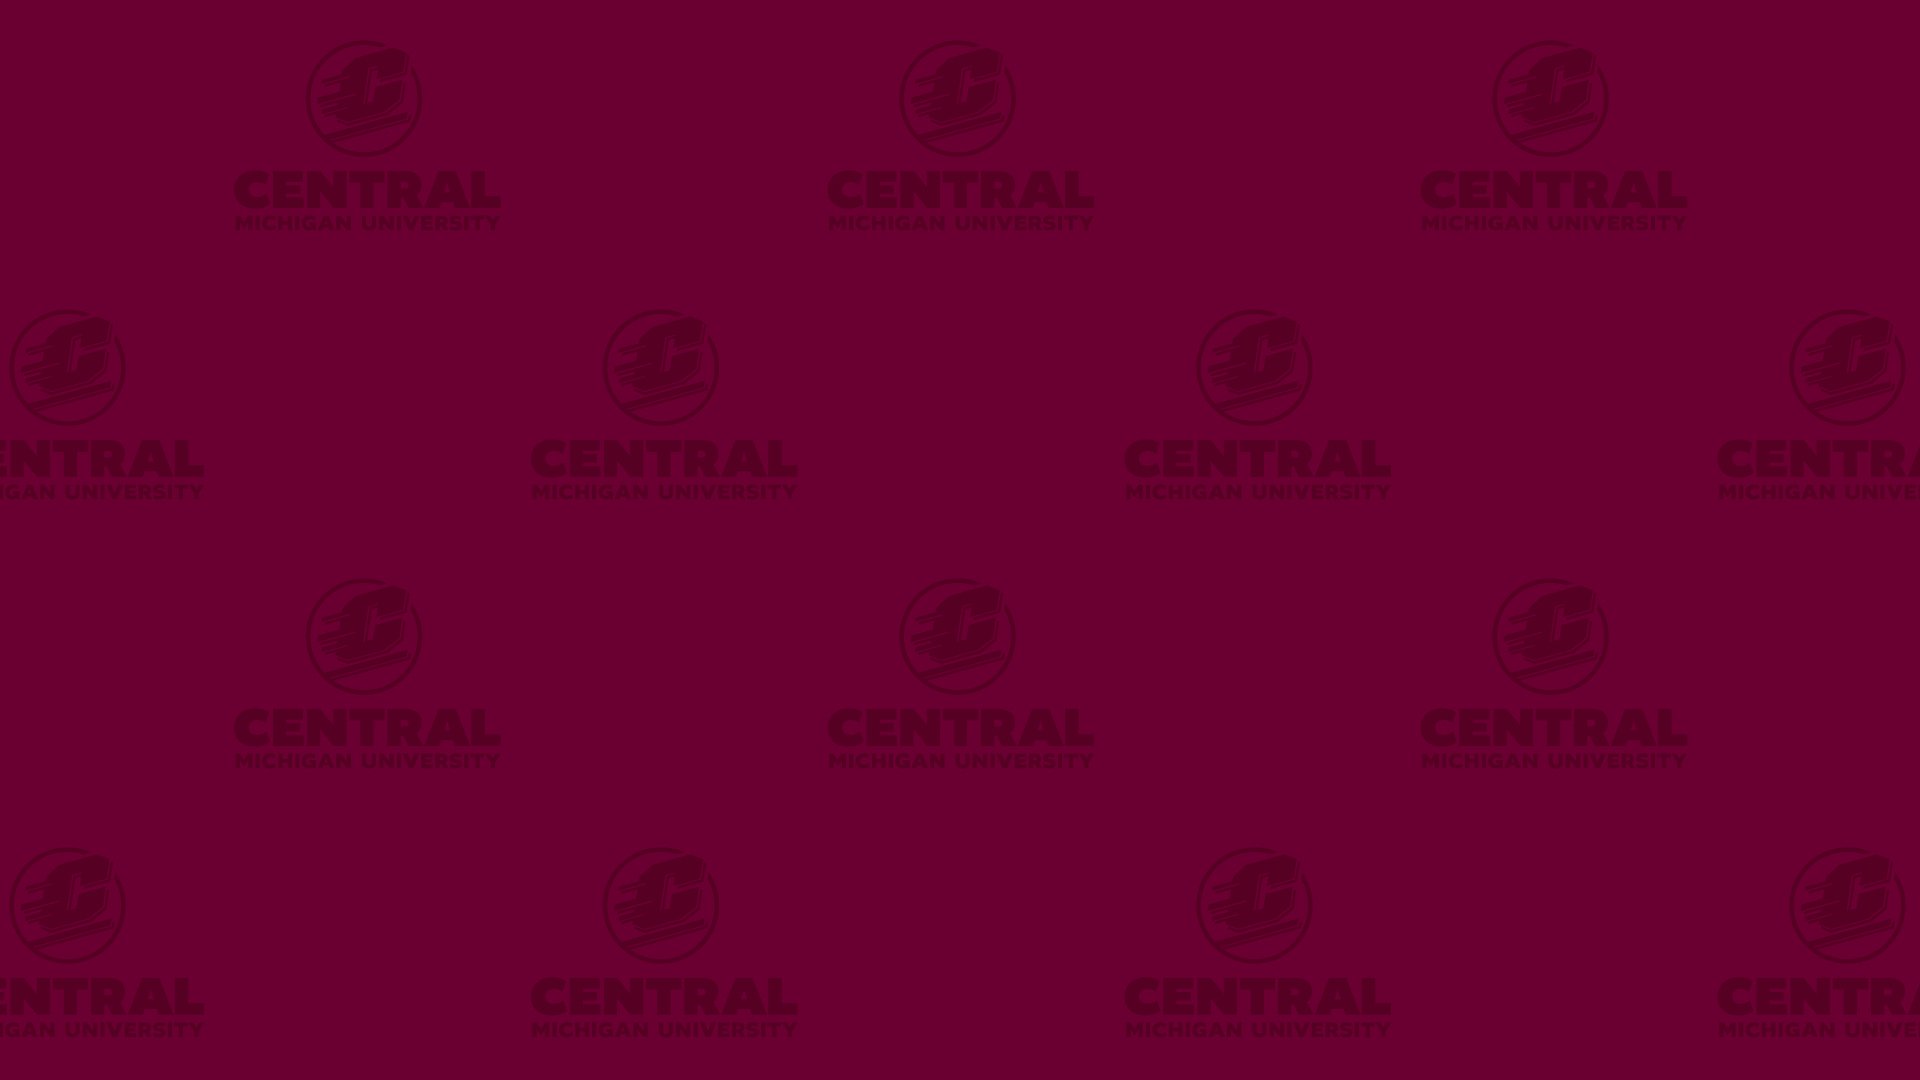 Central Michigan university signature repeated several time in maroon background